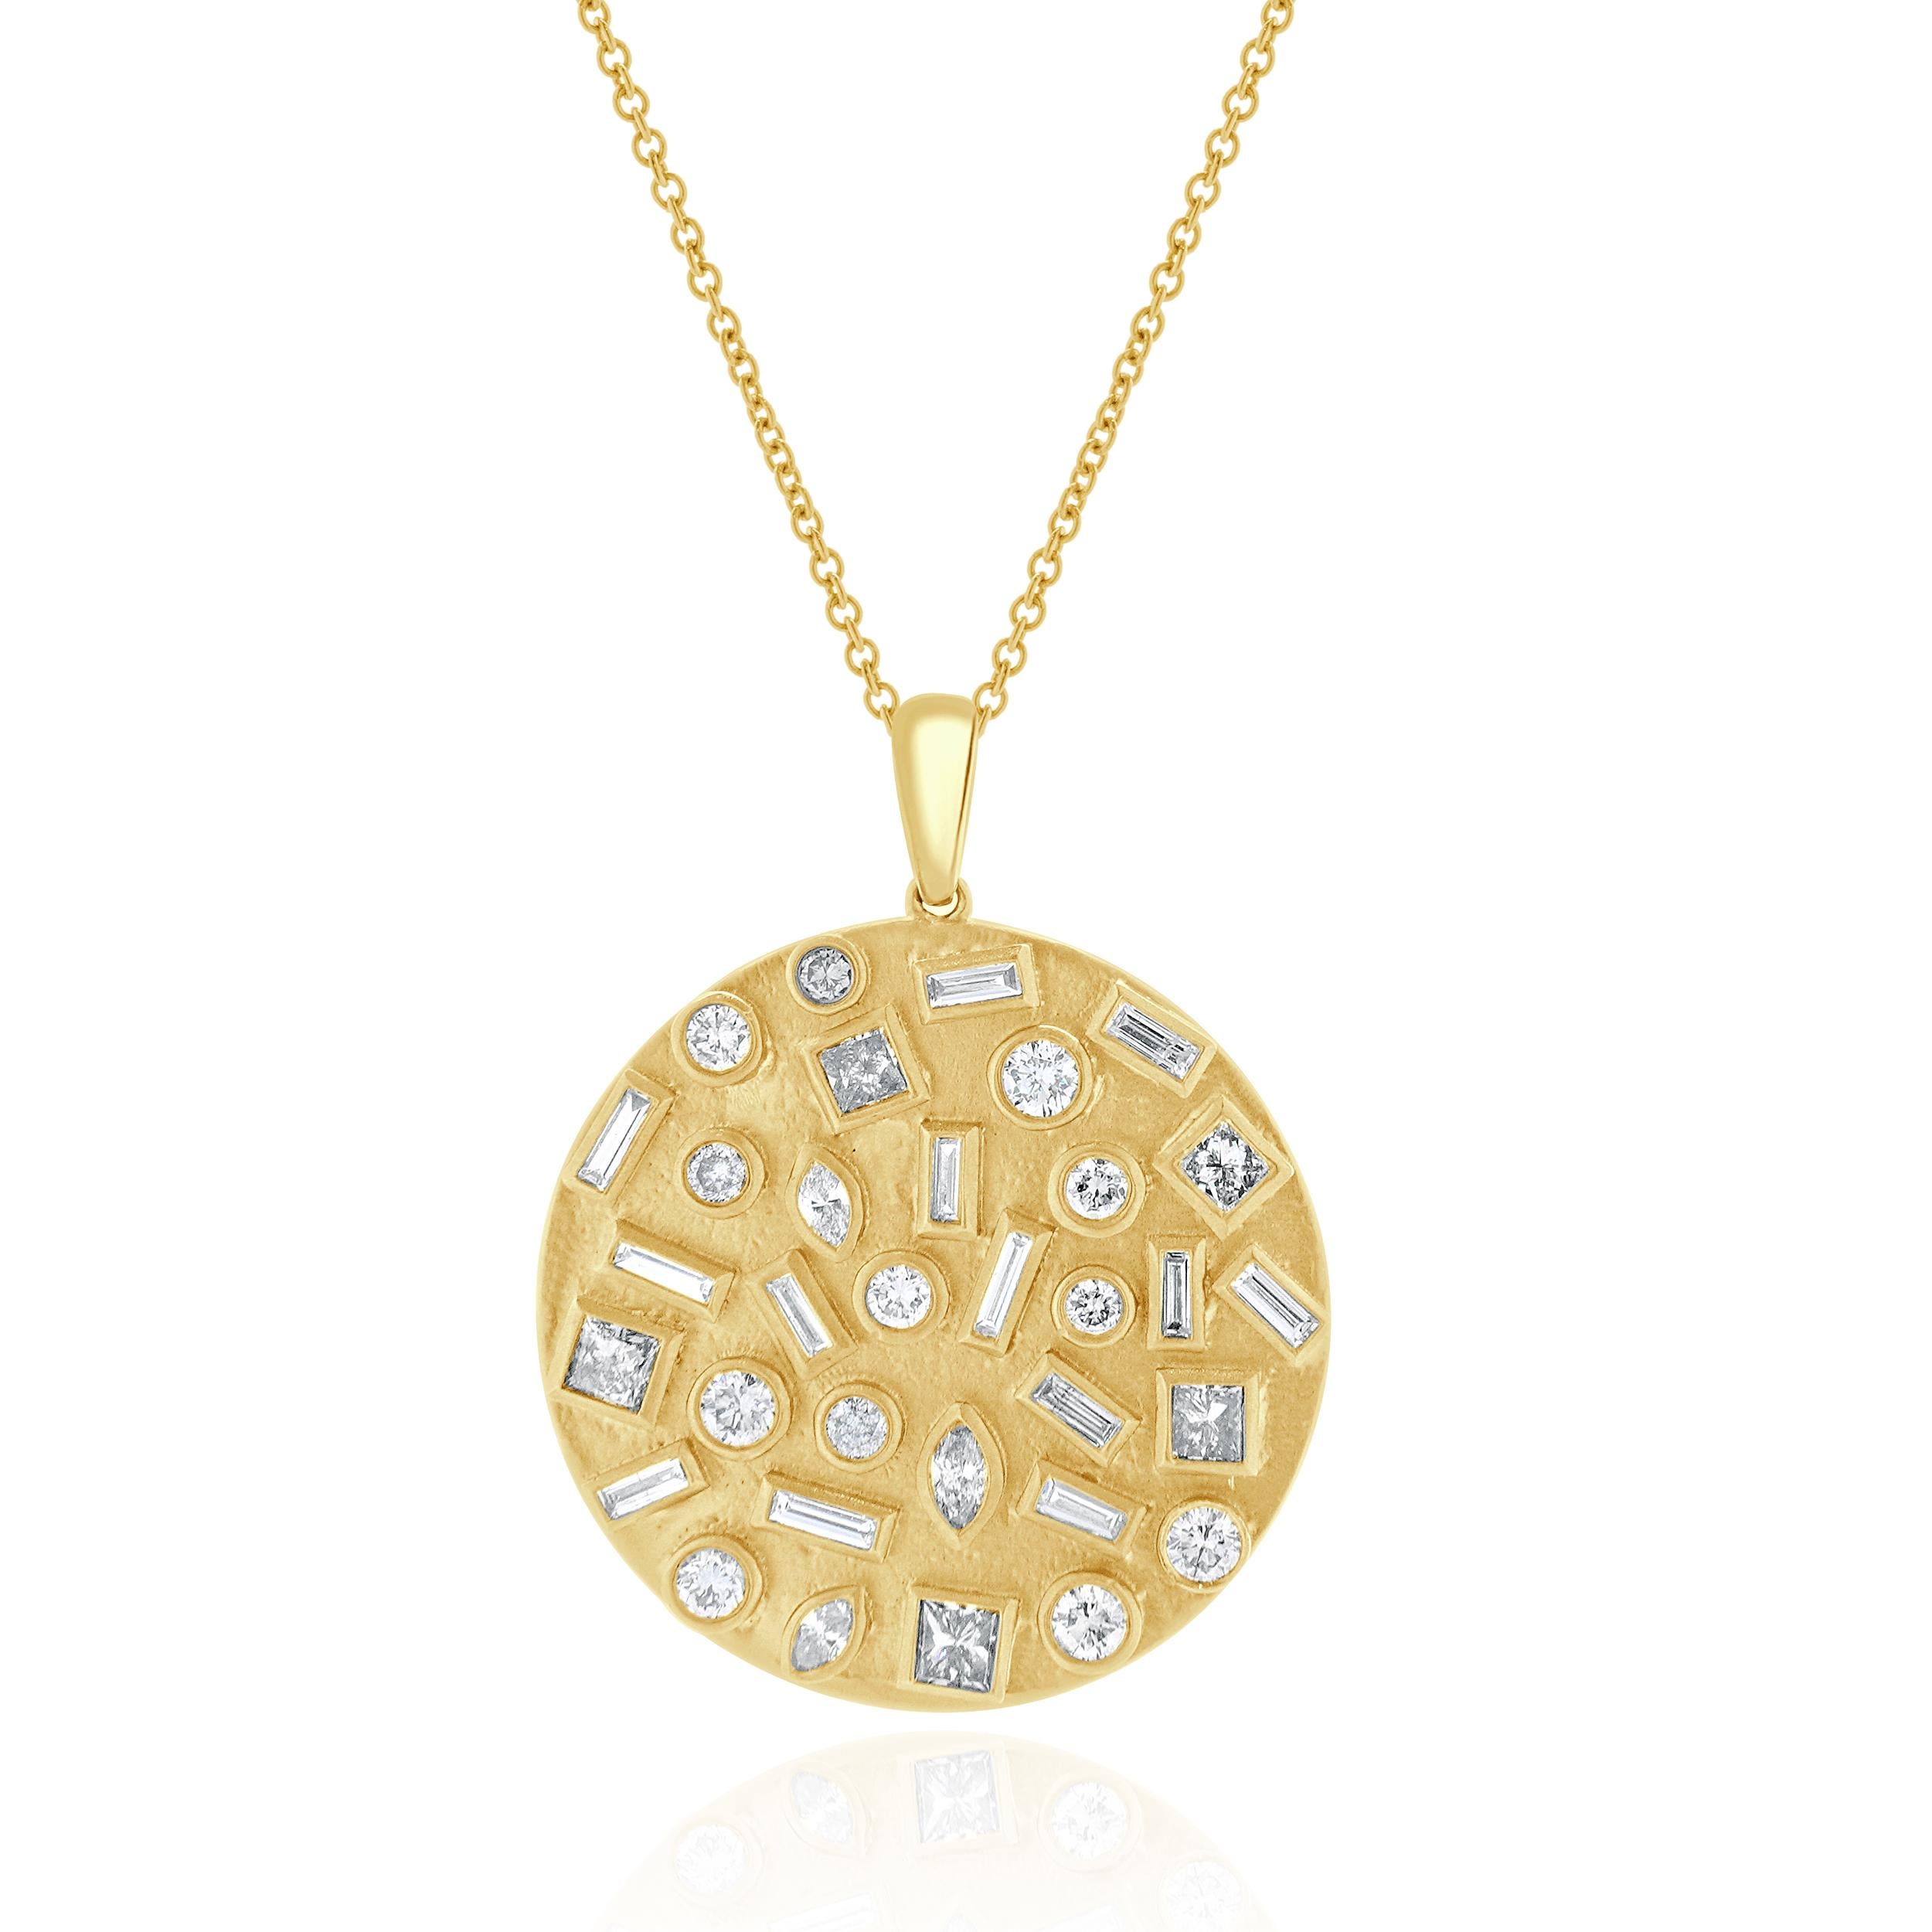 Designer: custom
Material: 14K yellow gold
Diamonds: 32 round brilliant, baguette, marquise, and princess cut = 2.57cttw
Color: H / I / J
Clarity: SI2-I1
Dimensions: necklace measures 18-inches in length 
Weight: 13.57 grams
